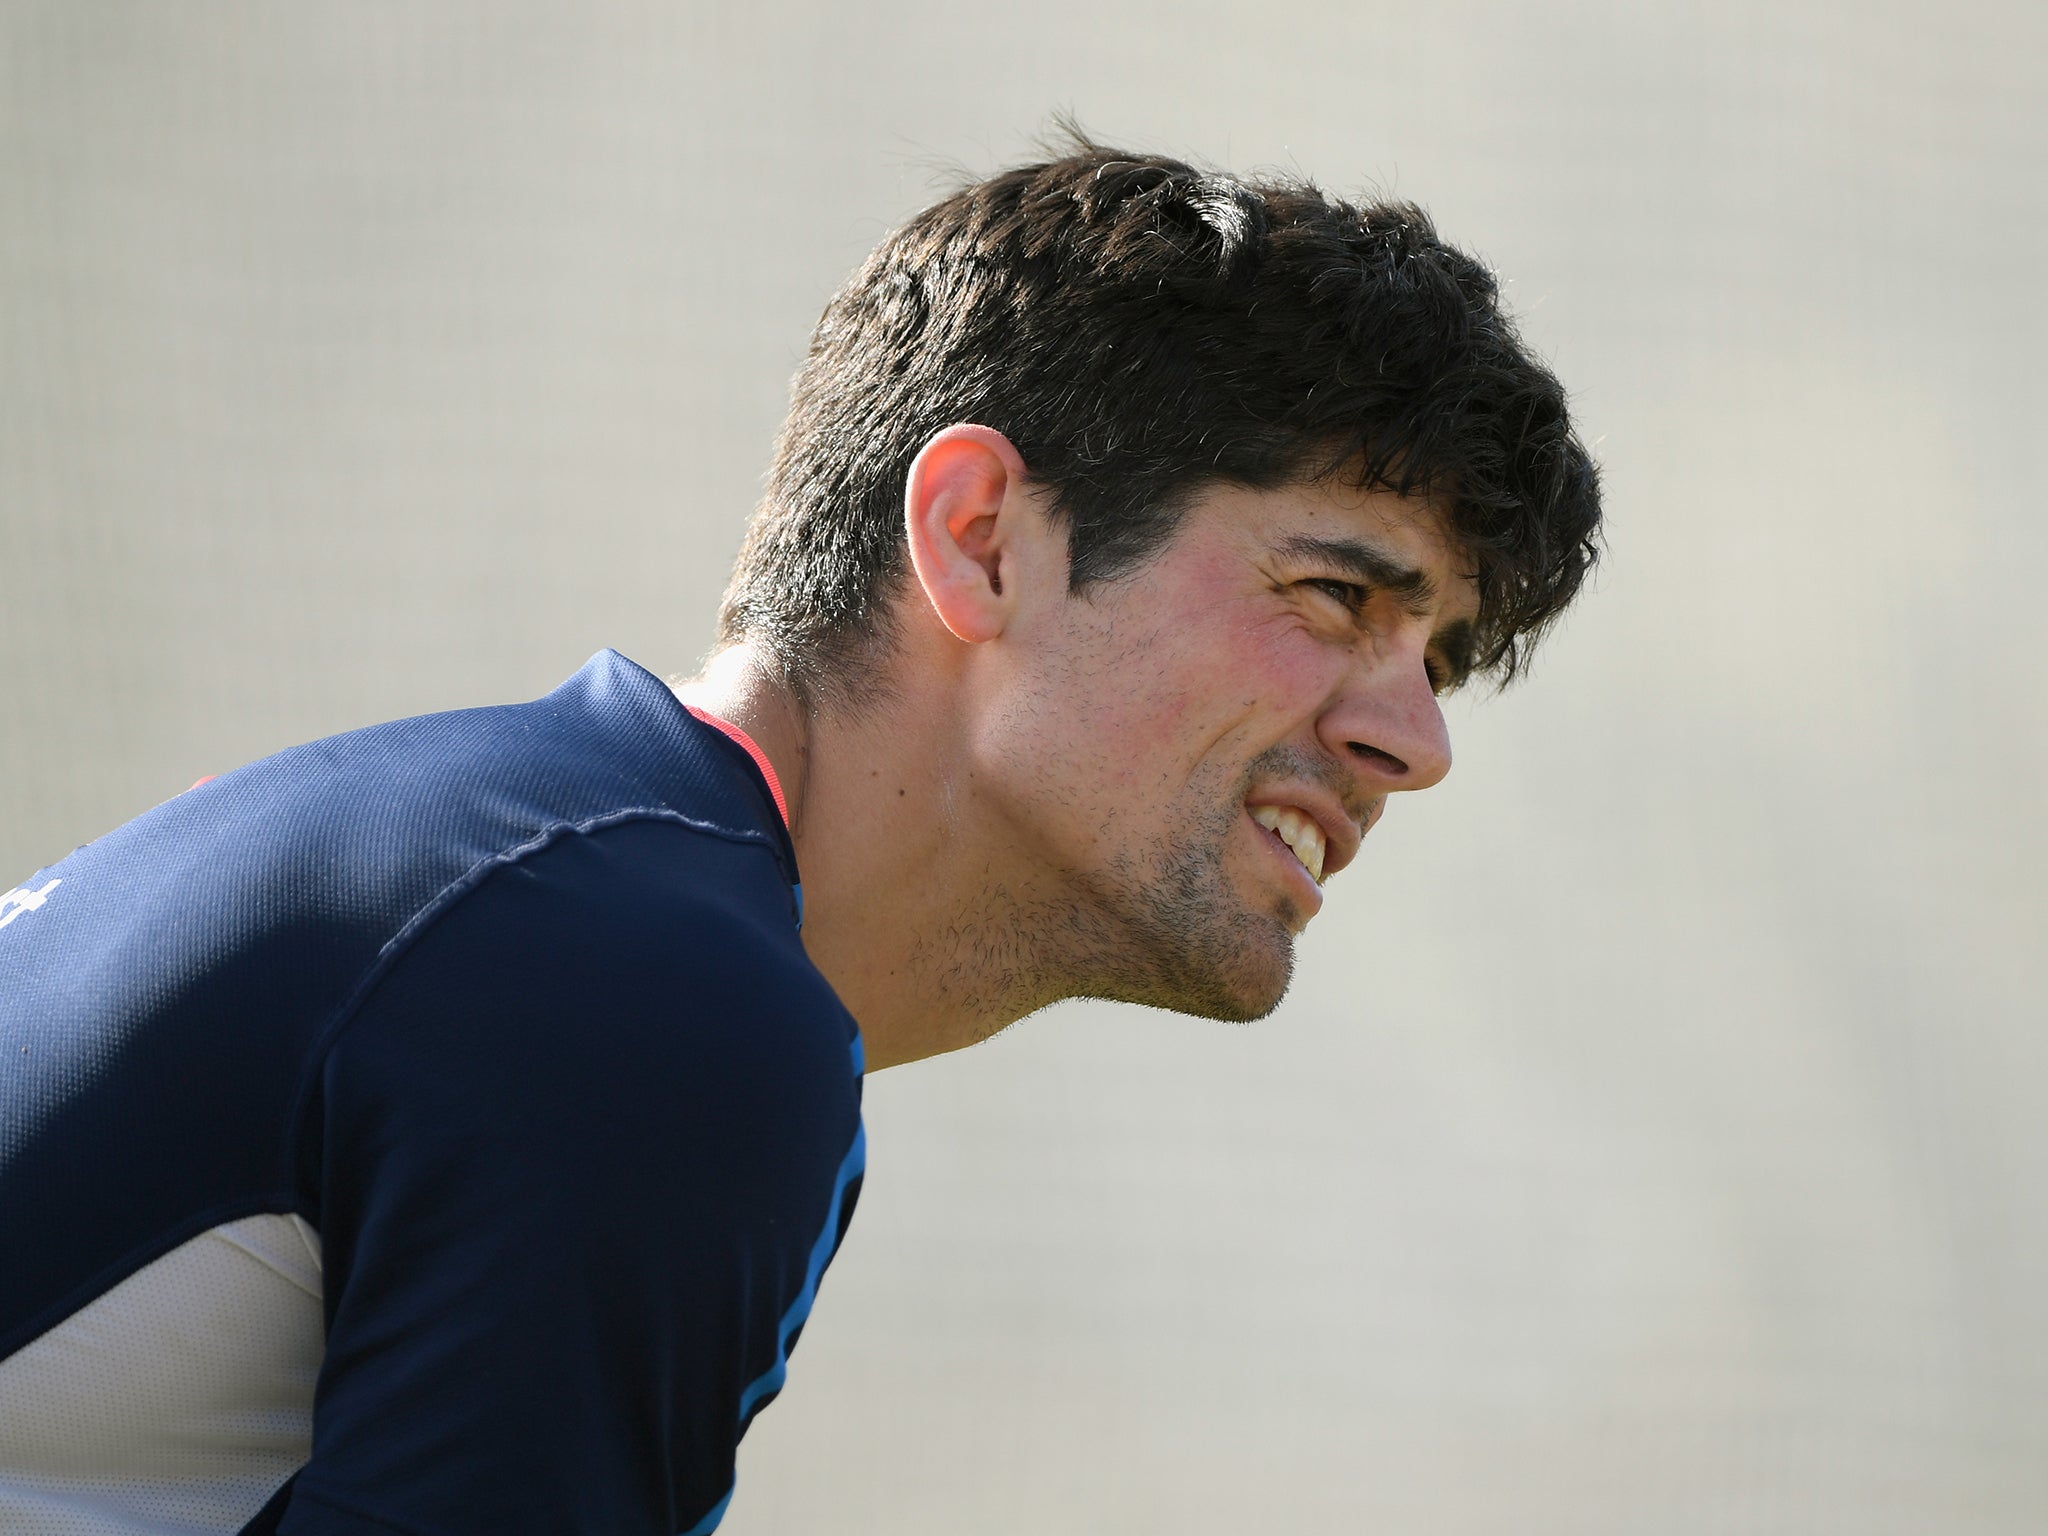 Alastair Cook is looking forward to facing Essex teammate Neil Wagner in England's Test series with New Zealand